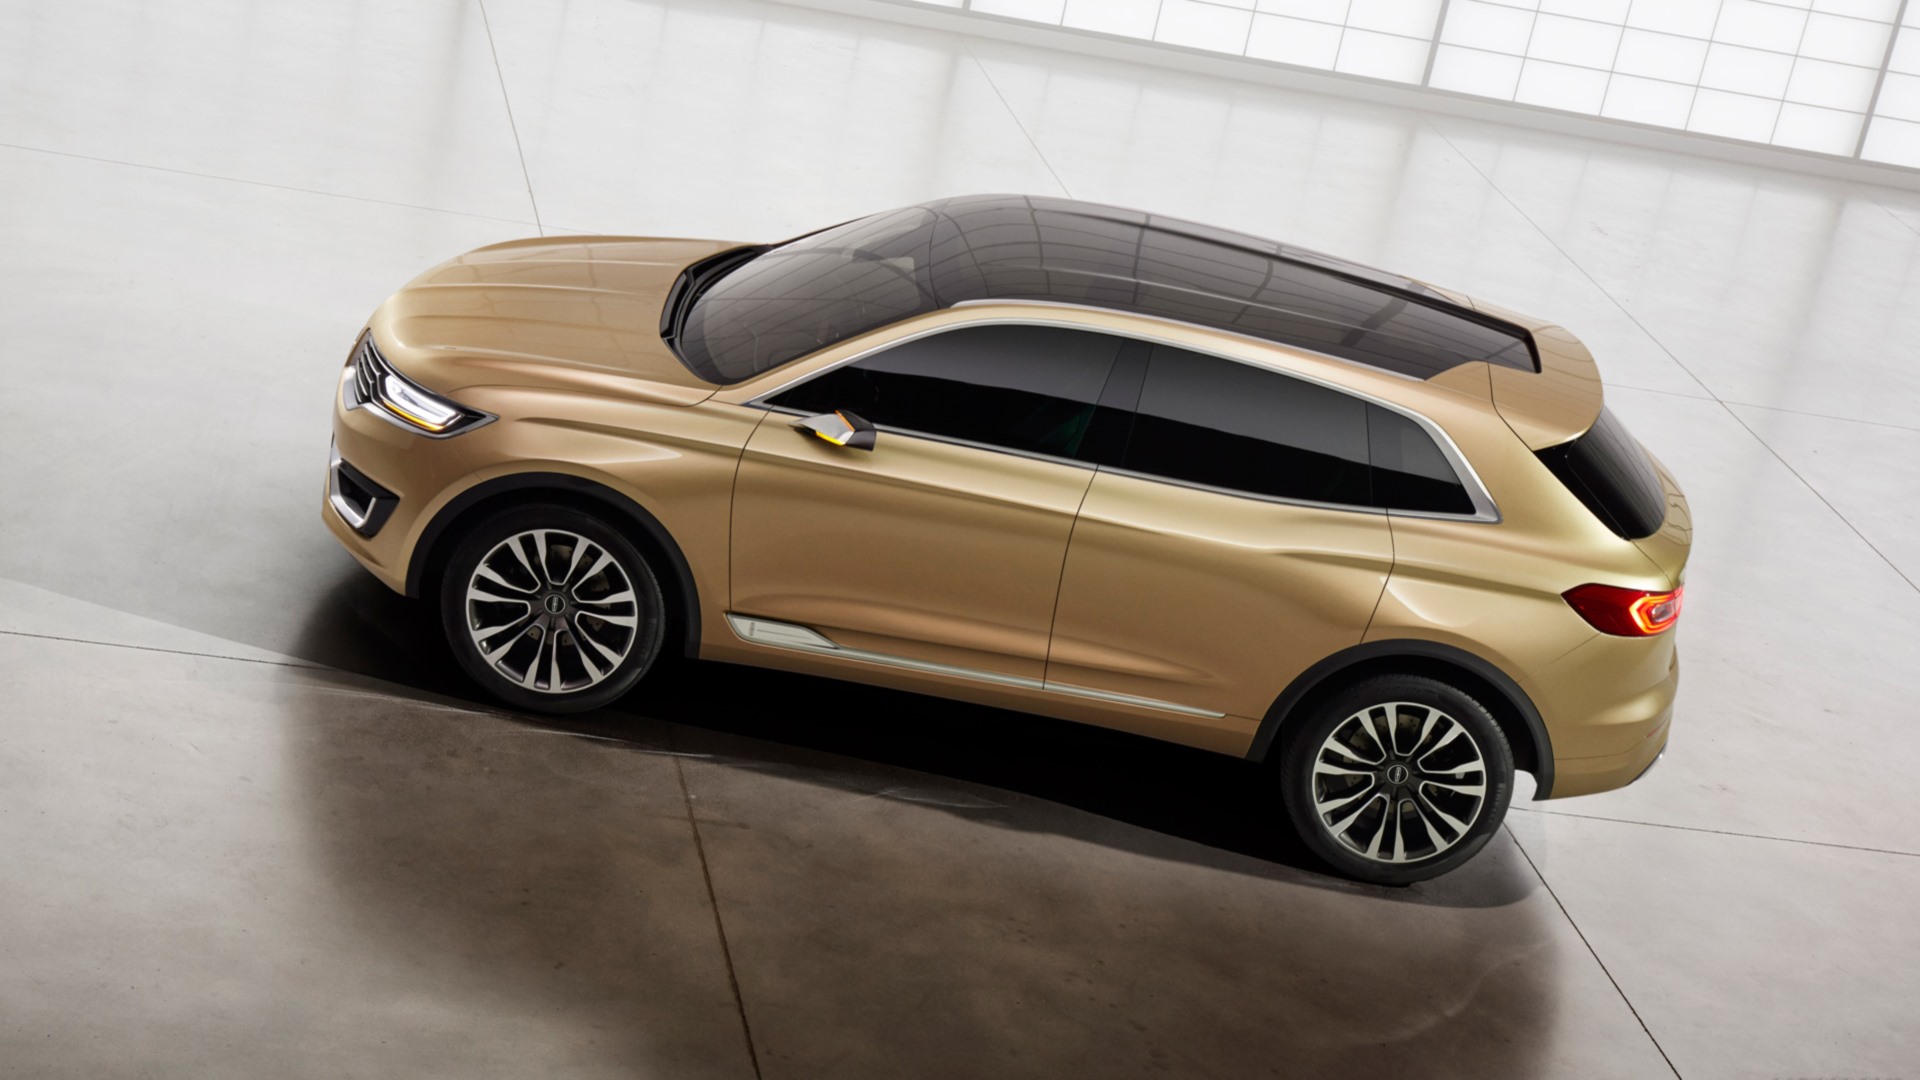 Vehicles Lincoln MKC HD Wallpaper | Background Image